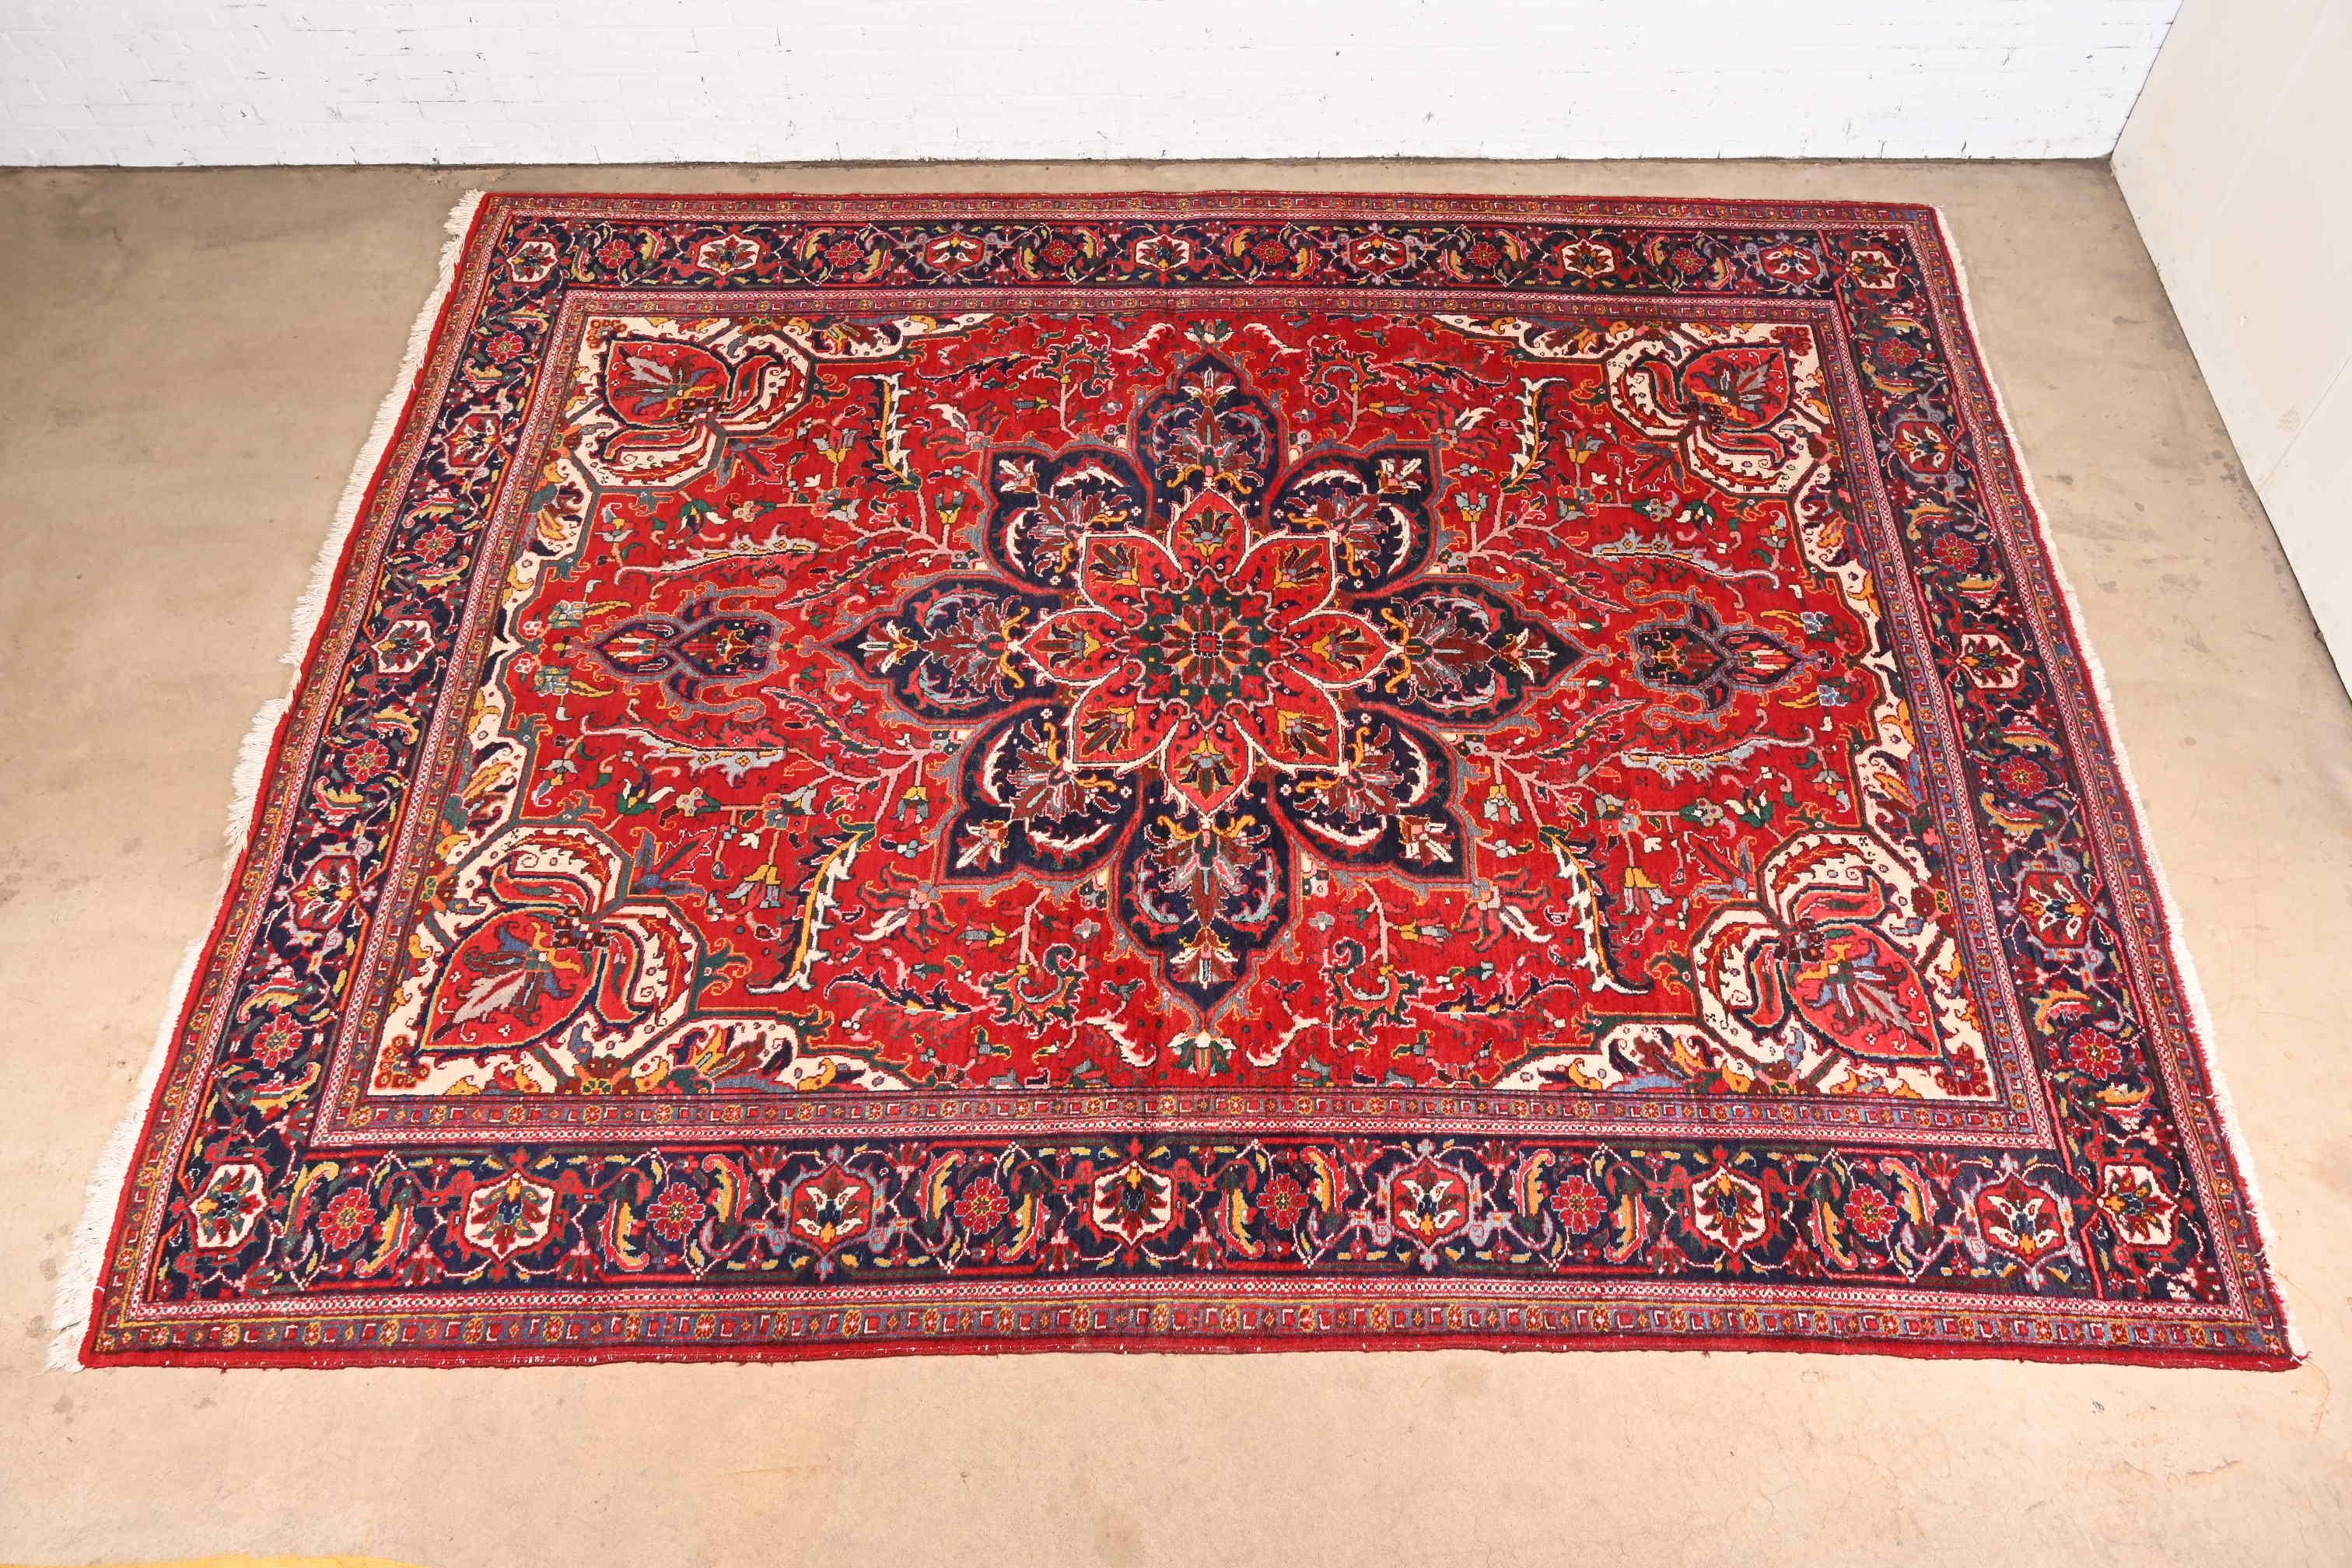 A gorgeous vintage hand-knotted Persian Heriz room size wool rug

Mid-20th Century

Beautiful floral design, with predominant colors in red, blue, gold, green, and ivory.

Measures: 10' x 12'4